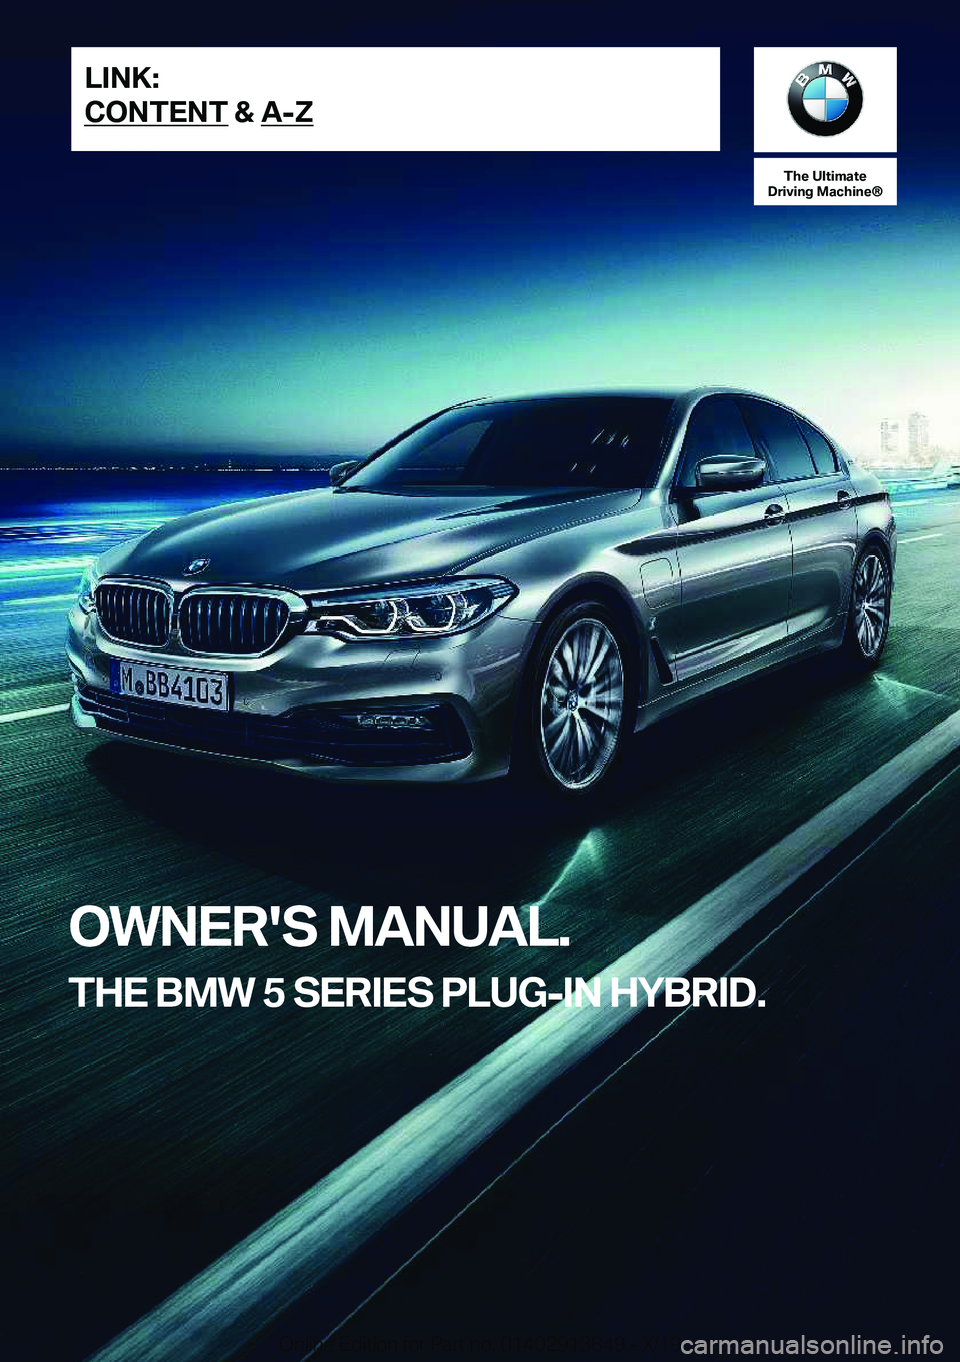 BMW 5 SERIES 2020  Owners Manual �T�h�e��U�l�t�i�m�a�t�e
�D�r�i�v�i�n�g��M�a�c�h�i�n�e�n
�O�W�N�E�R�'�S��M�A�N�U�A�L�.
�T�H�E��B�M�W��5��S�E�R�I�E�S��P�L�U�G�-�I�N��H�Y�B�R�I�D�.�L�I�N�K�:
�C�O�N�T�E�N�T��&��A�-�Z�O�n�l